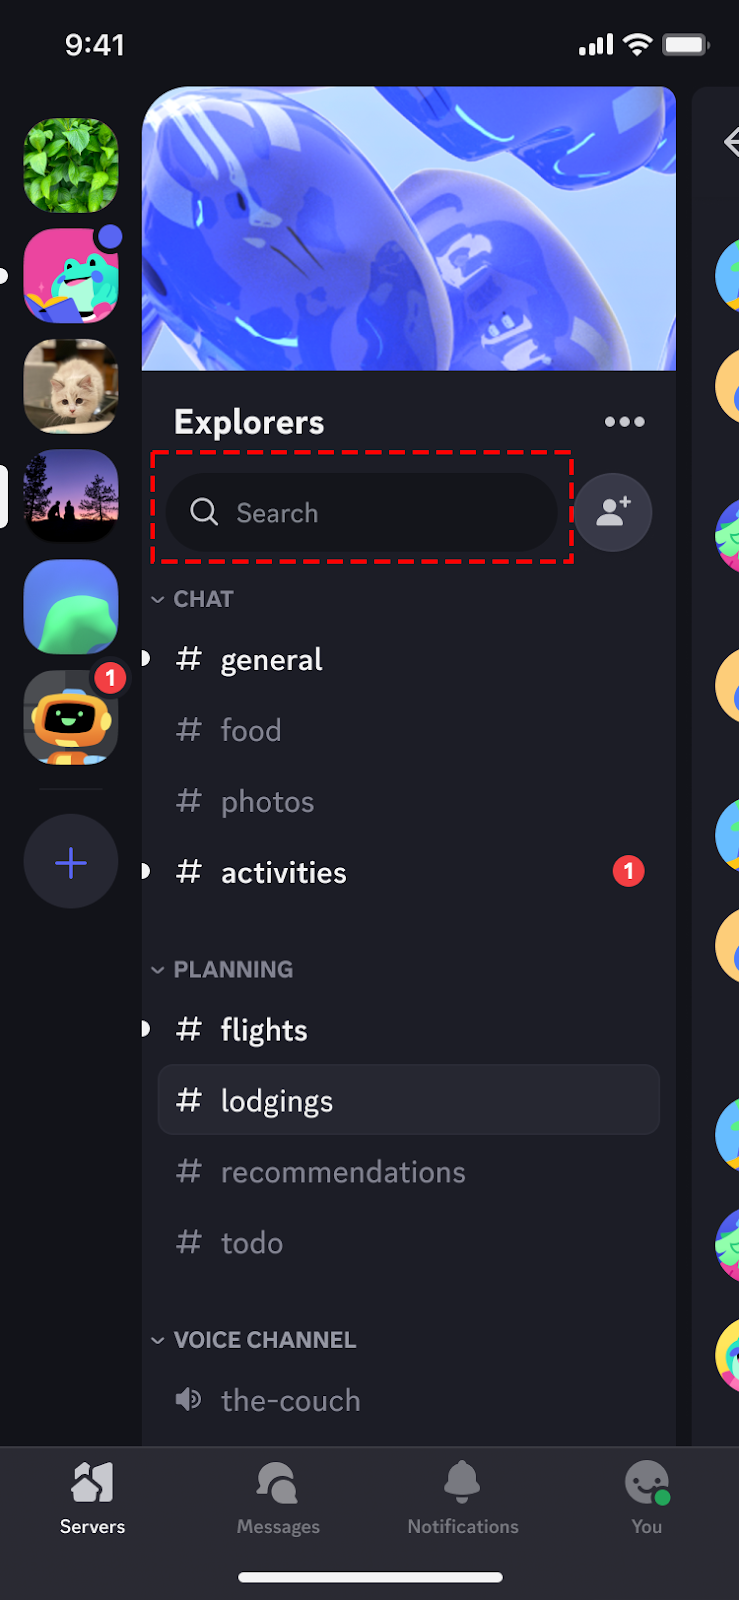 The Discord user interface. The far left sidebar lists all the Discord